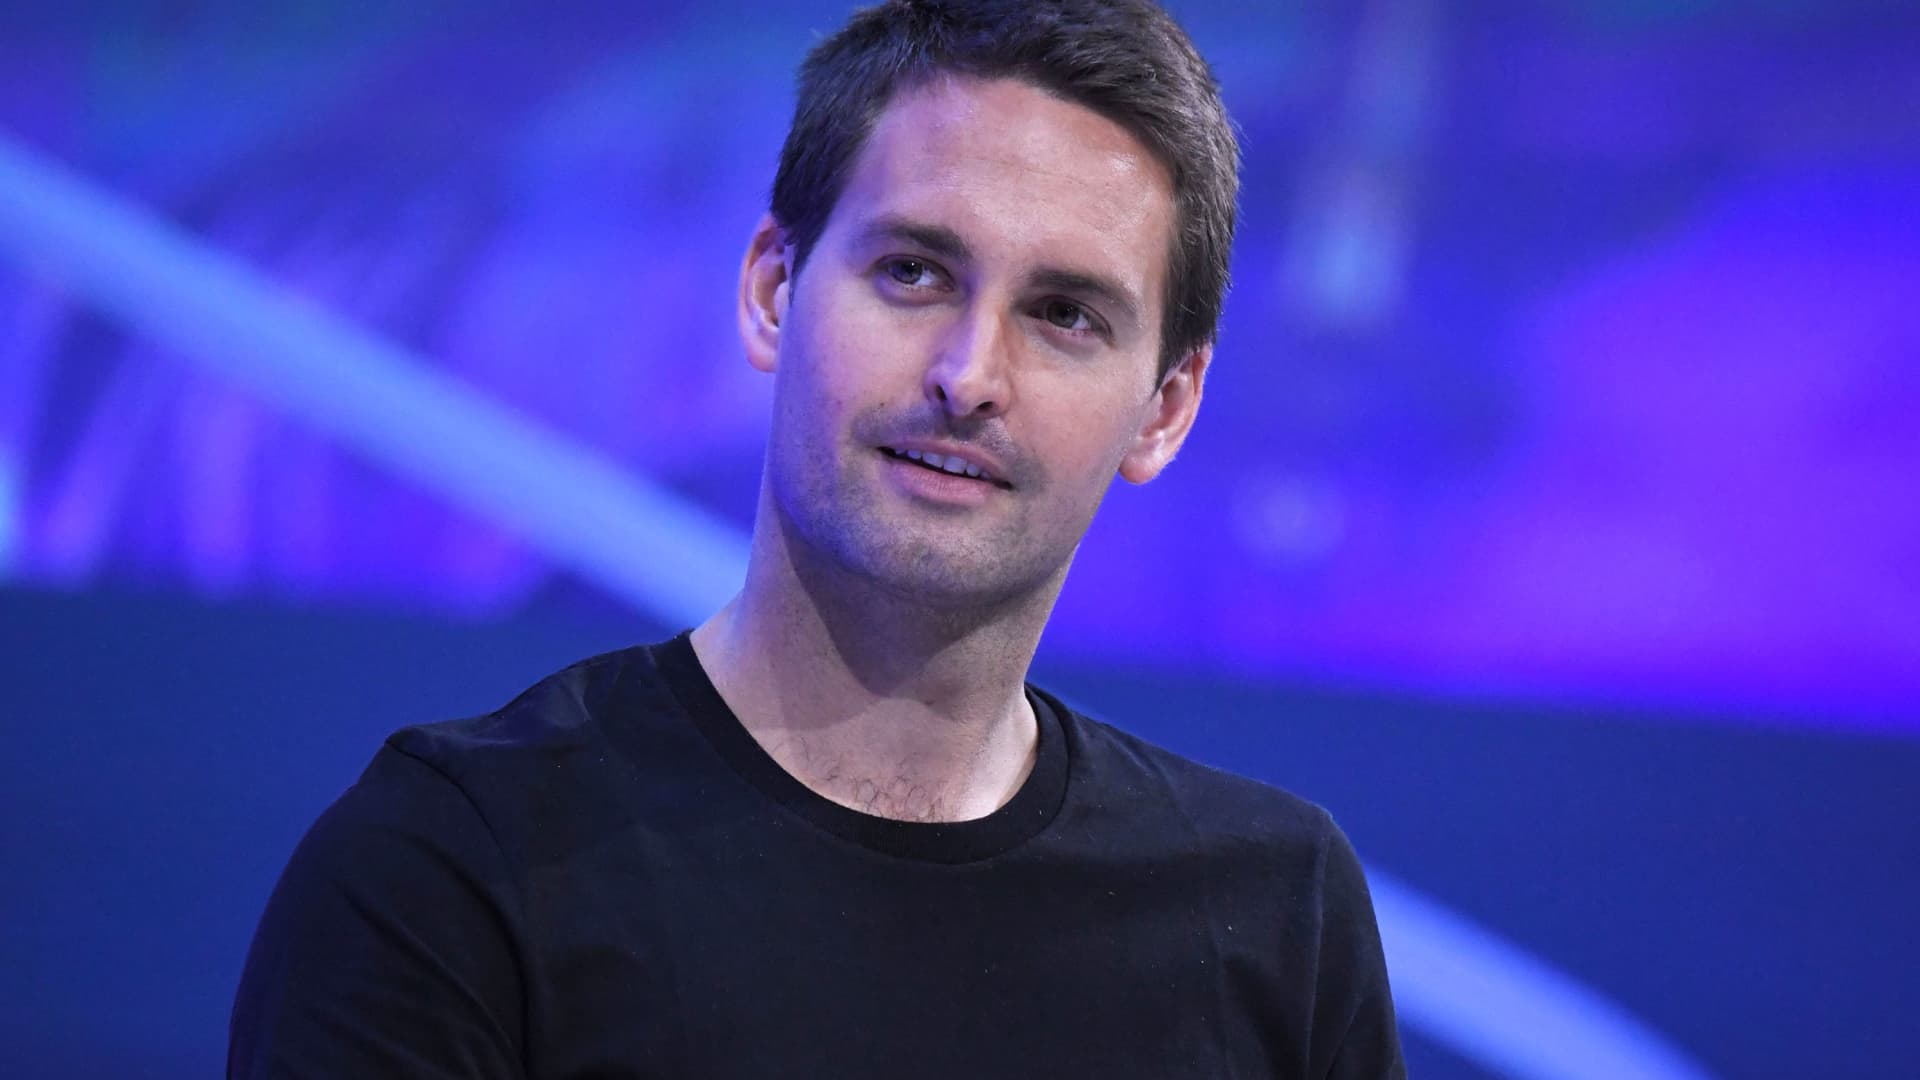 Snapchat is coming to the web after more than a decade as a mobile app